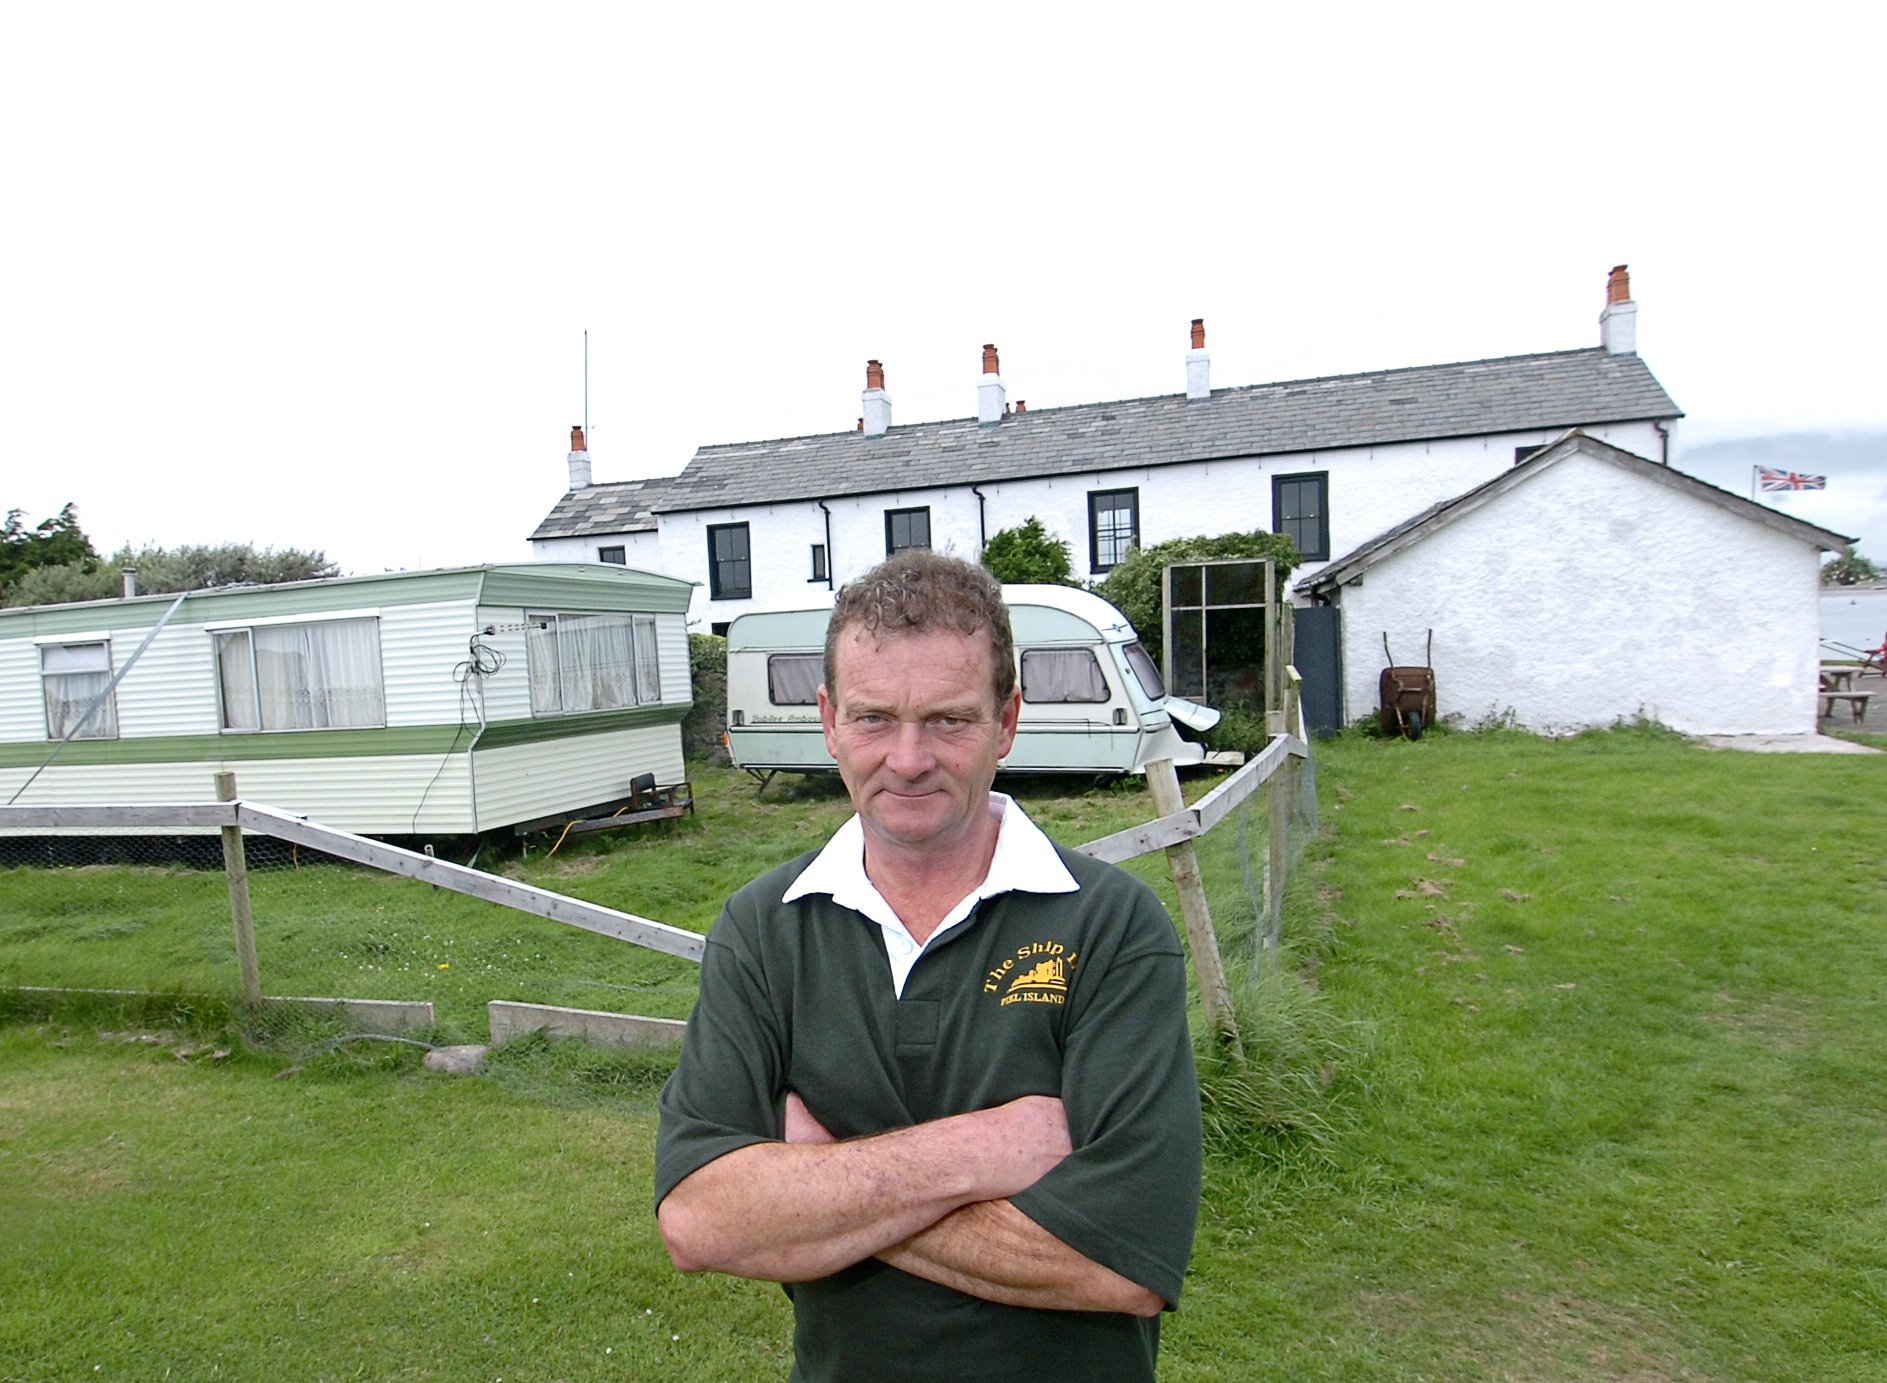 LEAVING: Landlord and King of Piel Steve Chattaway, outside the Ship Inn where funding for renovation of the pub and surrounding grounds of £160,000 was been pulled by Barrow Borough Council, leaving Mr Chattaway and his family living in a caravan